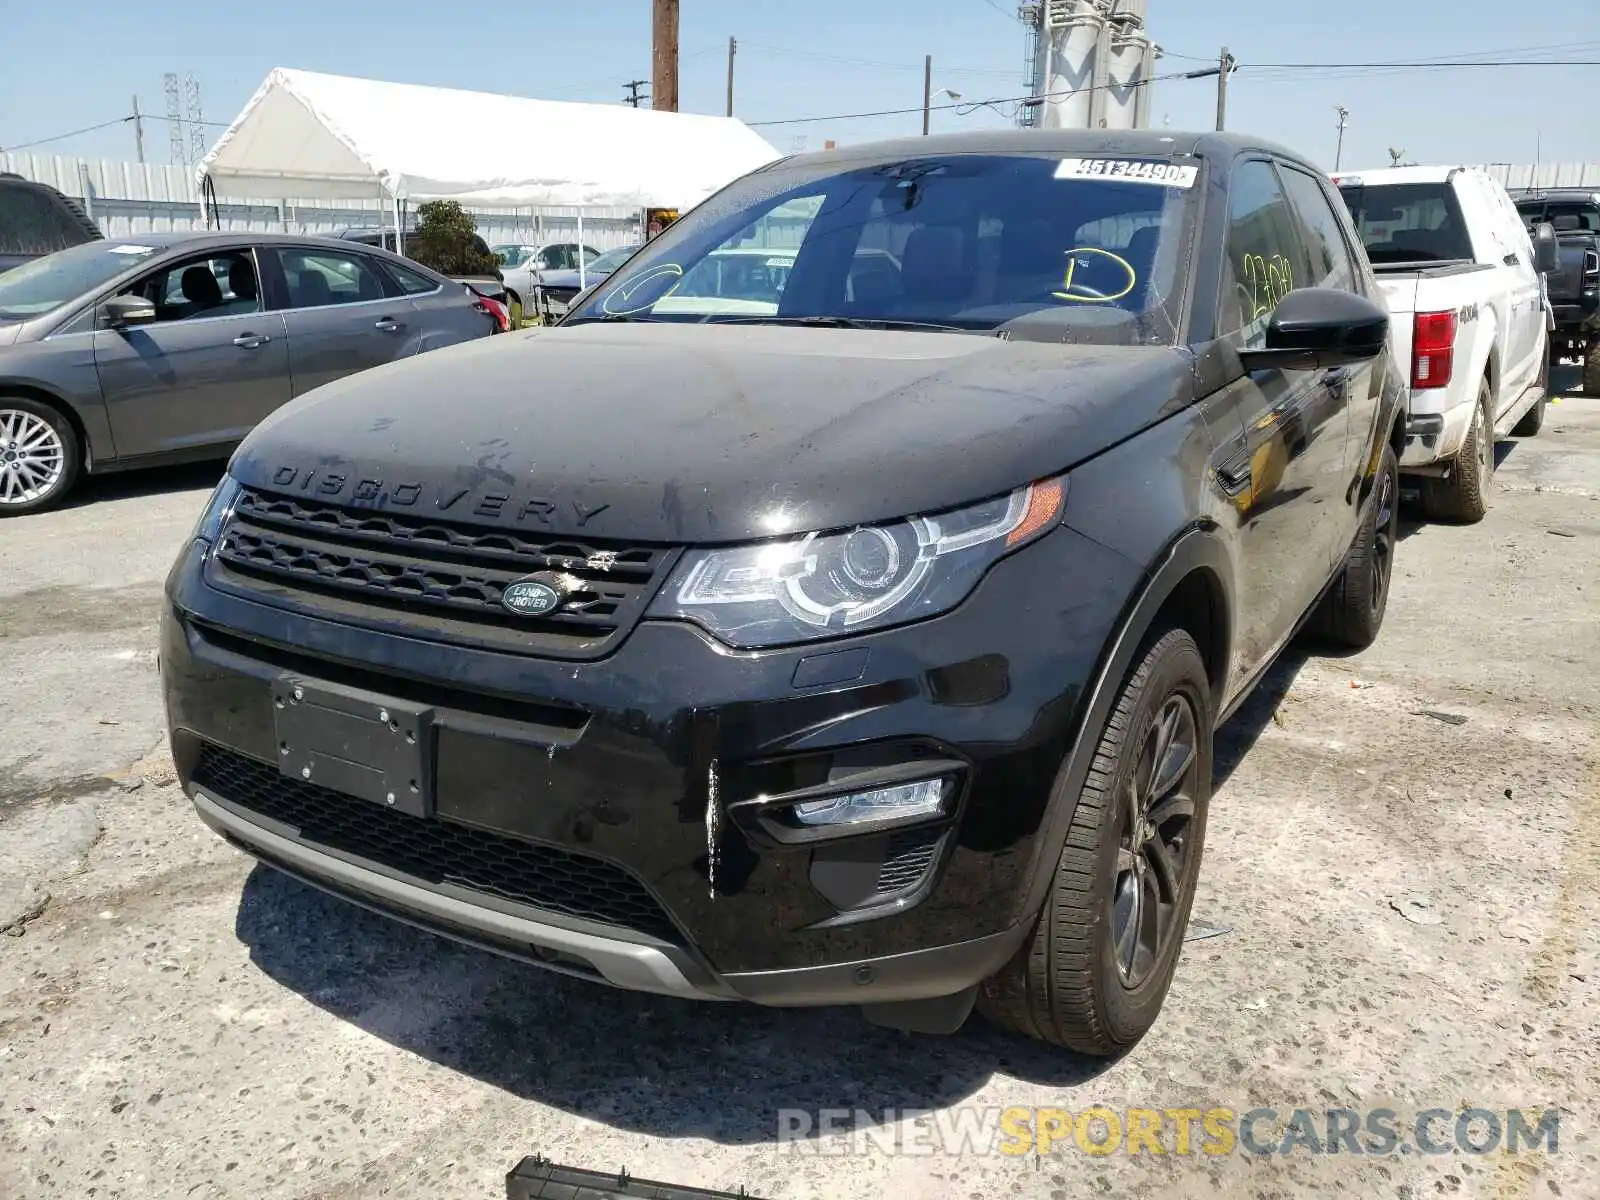 2 Photograph of a damaged car SALCR2FX8KH811562 LAND ROVER DISCOVERY 2019